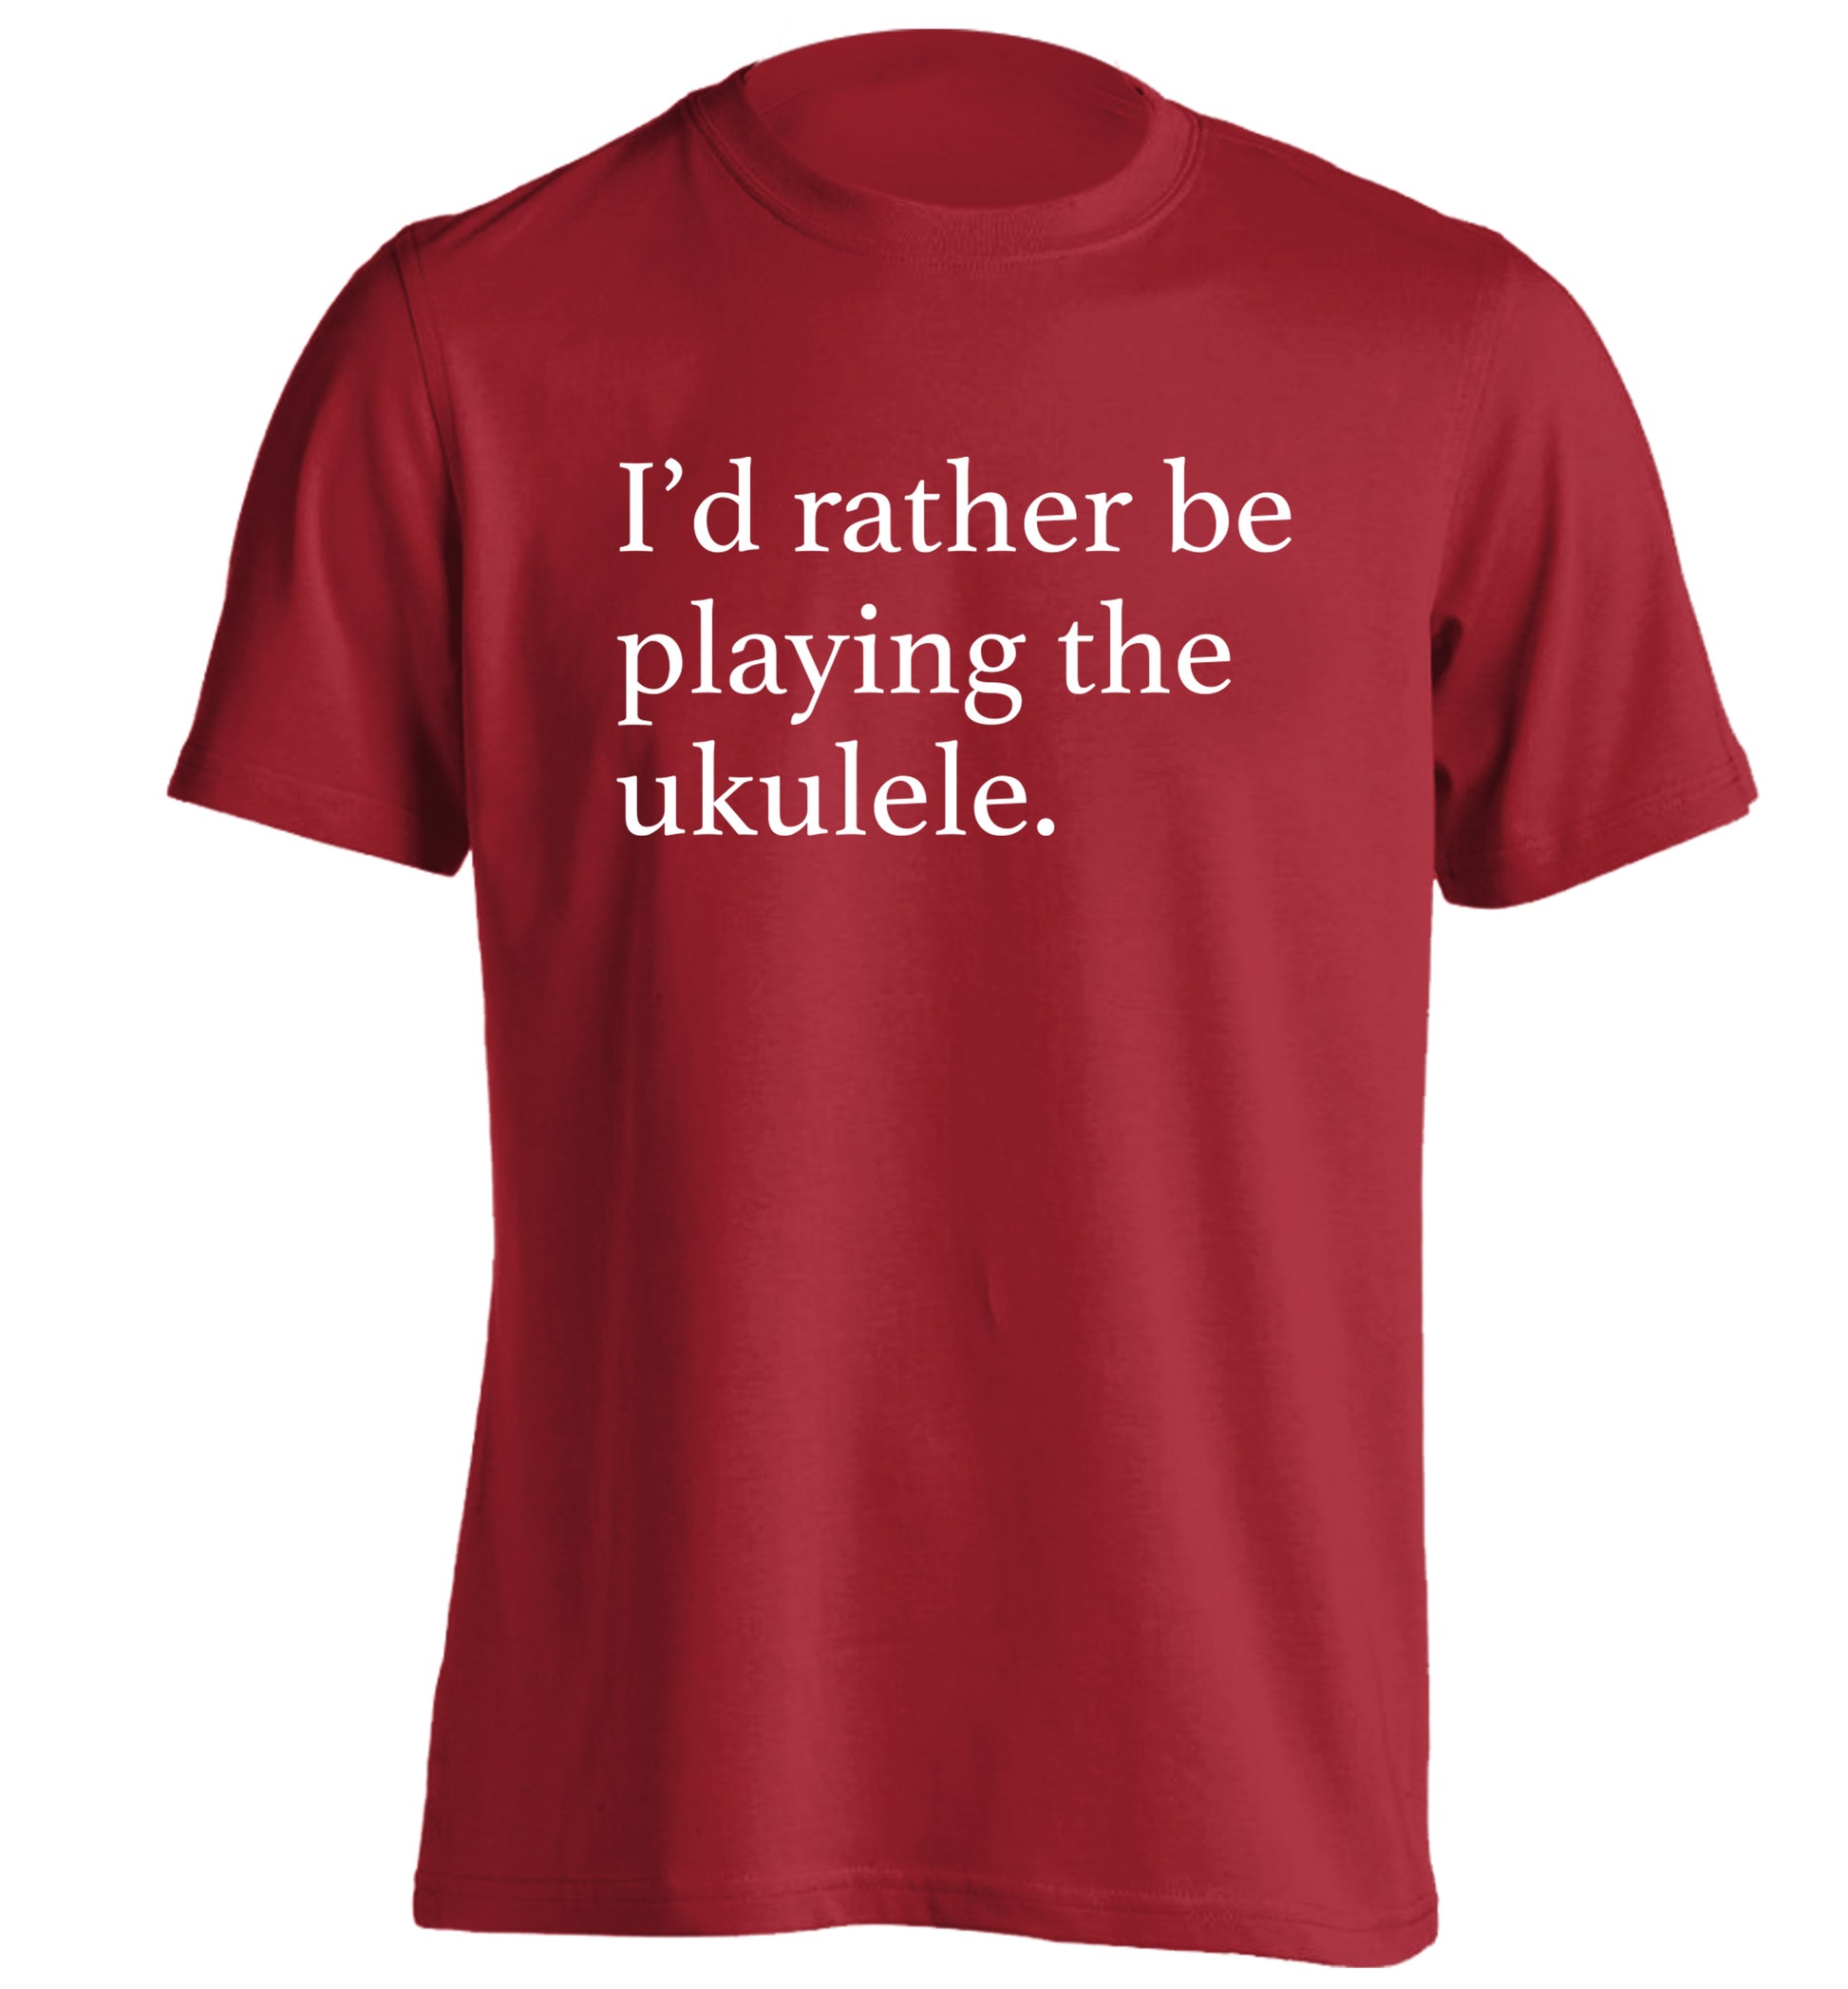 I'd rather by playing the ukulele adults unisex red Tshirt 2XL